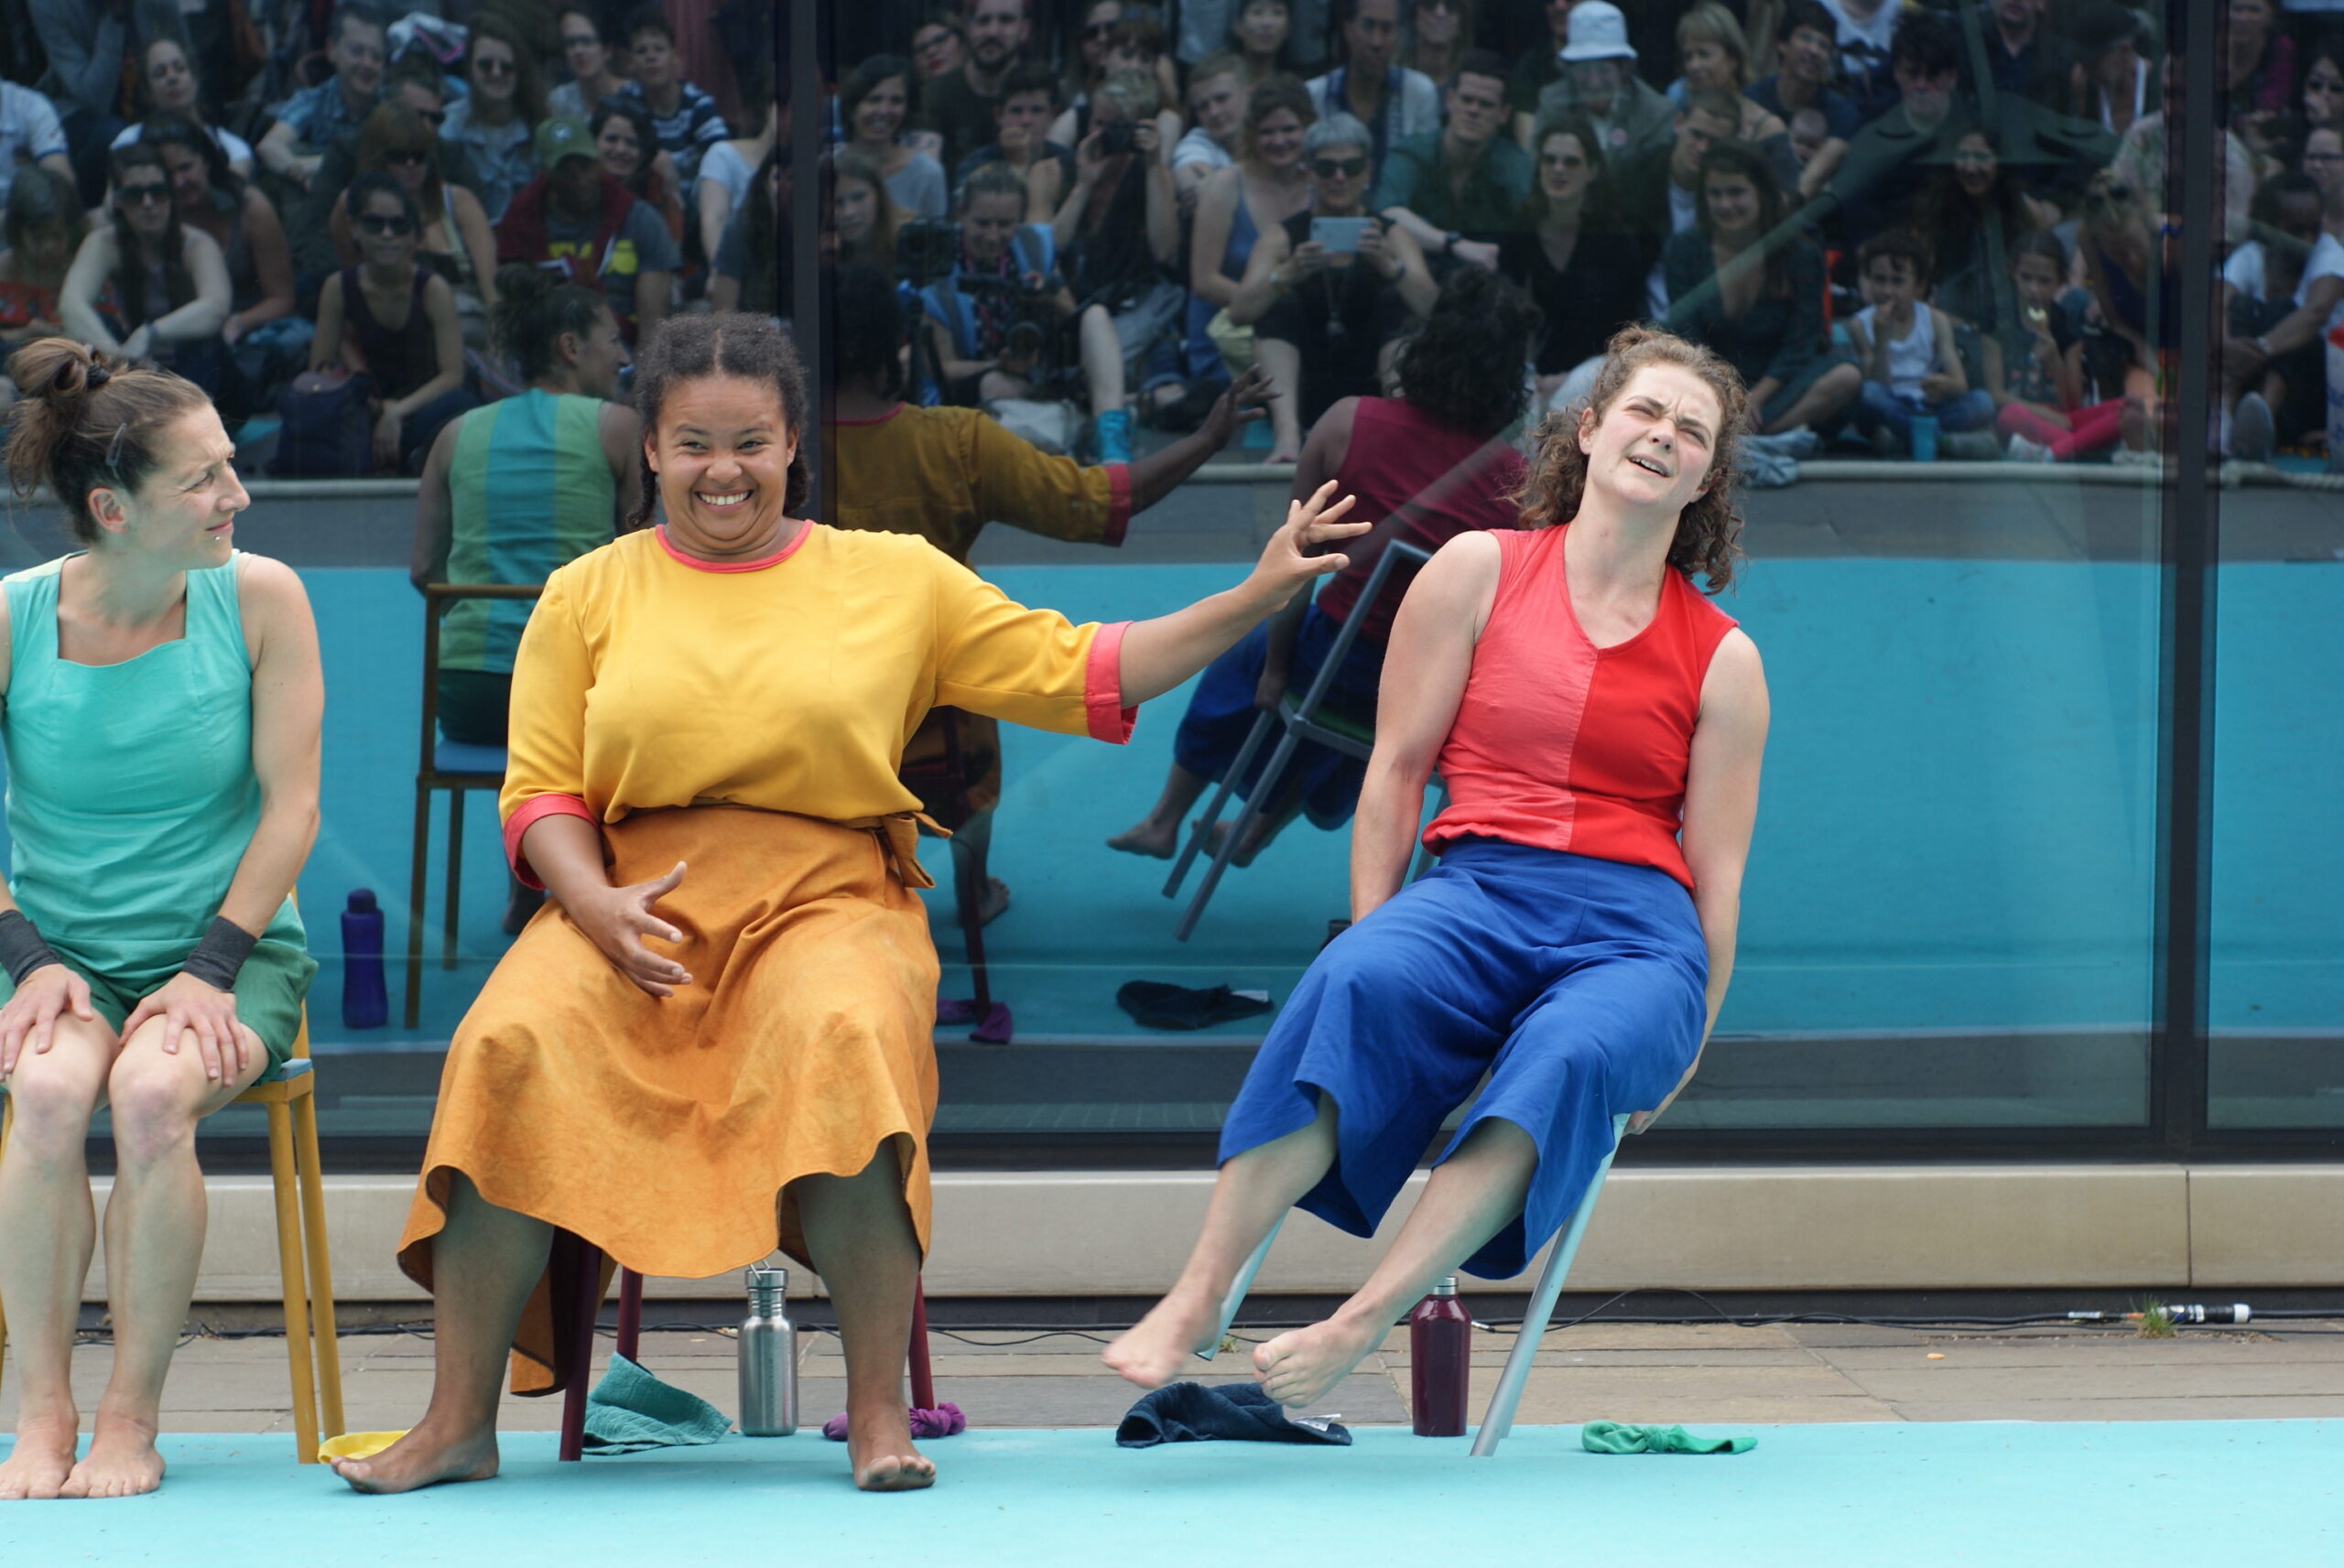 three women sitting on chairs. One of them is toppling to the side after being pushed by the woman sitting next to her. In the background is a reflects a large outdoor audience.